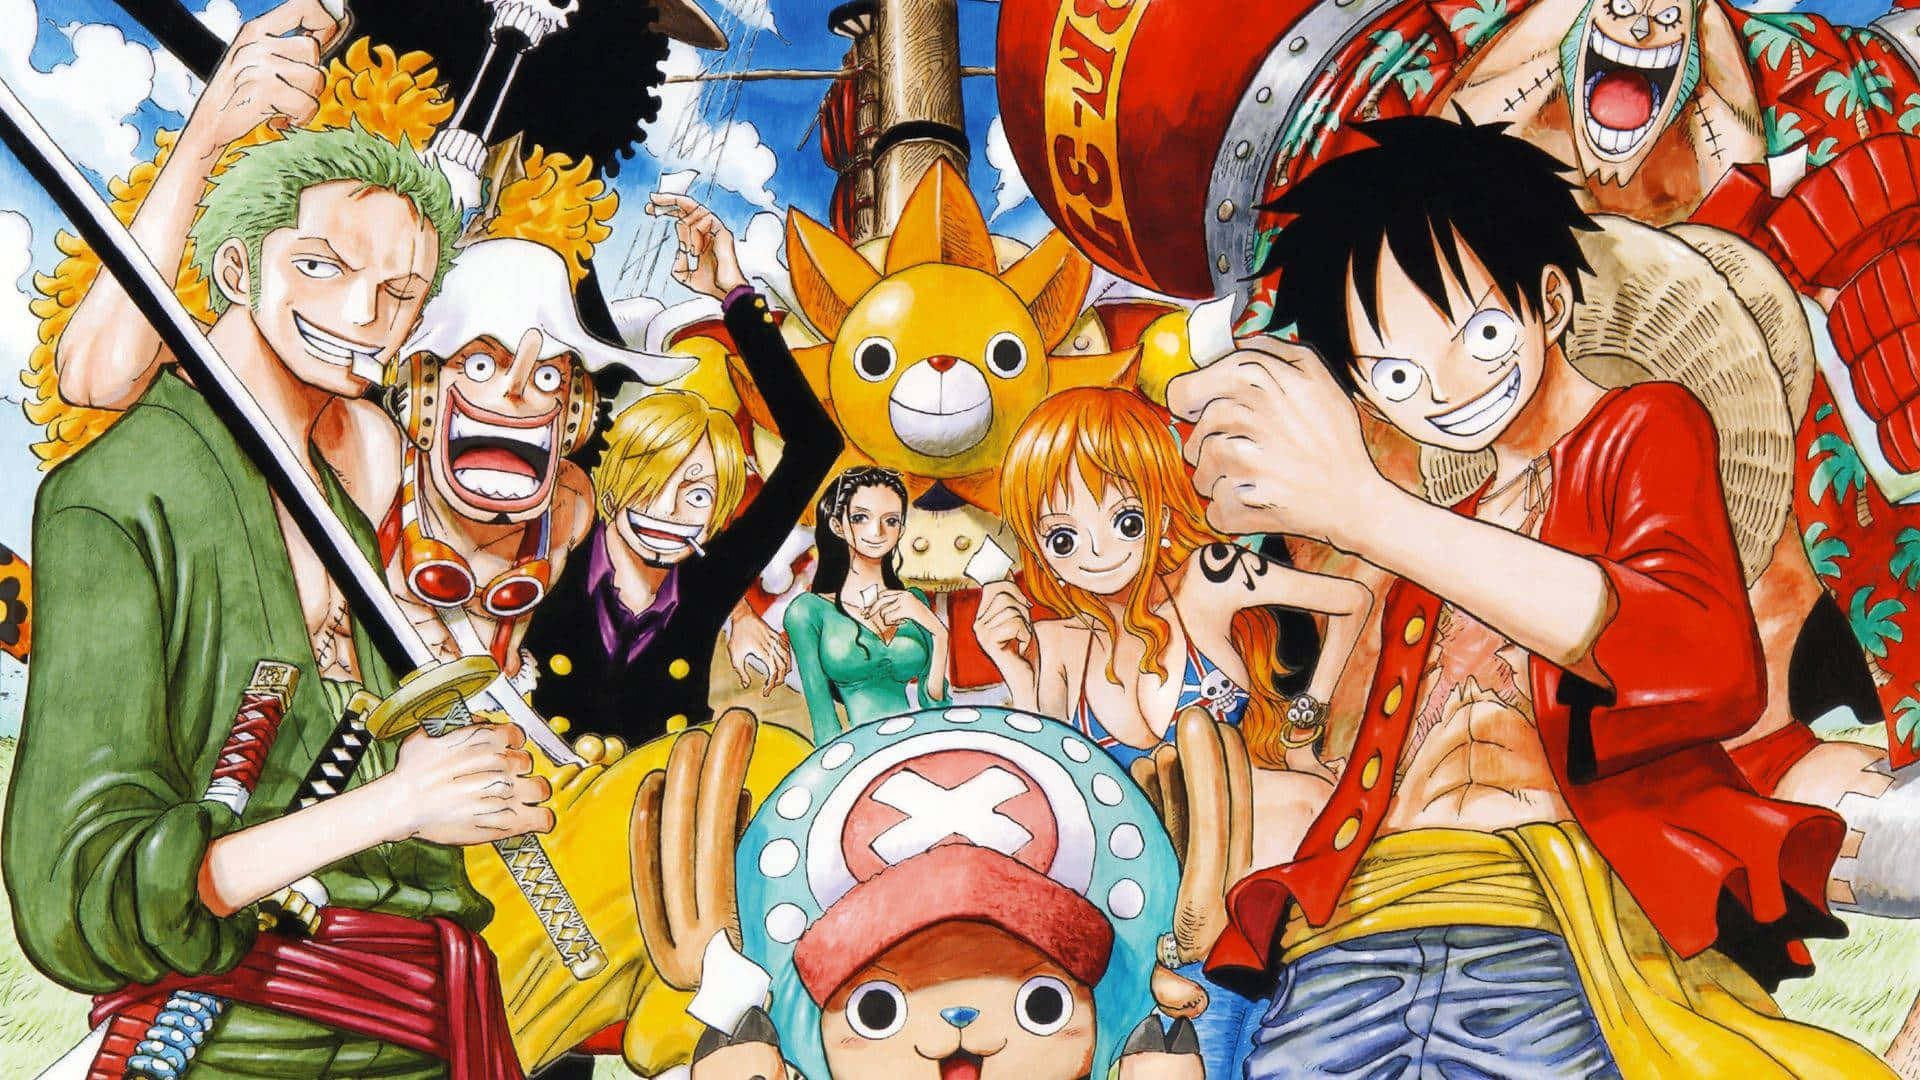 100+ One Piece Live Wallpapers 4K & HD